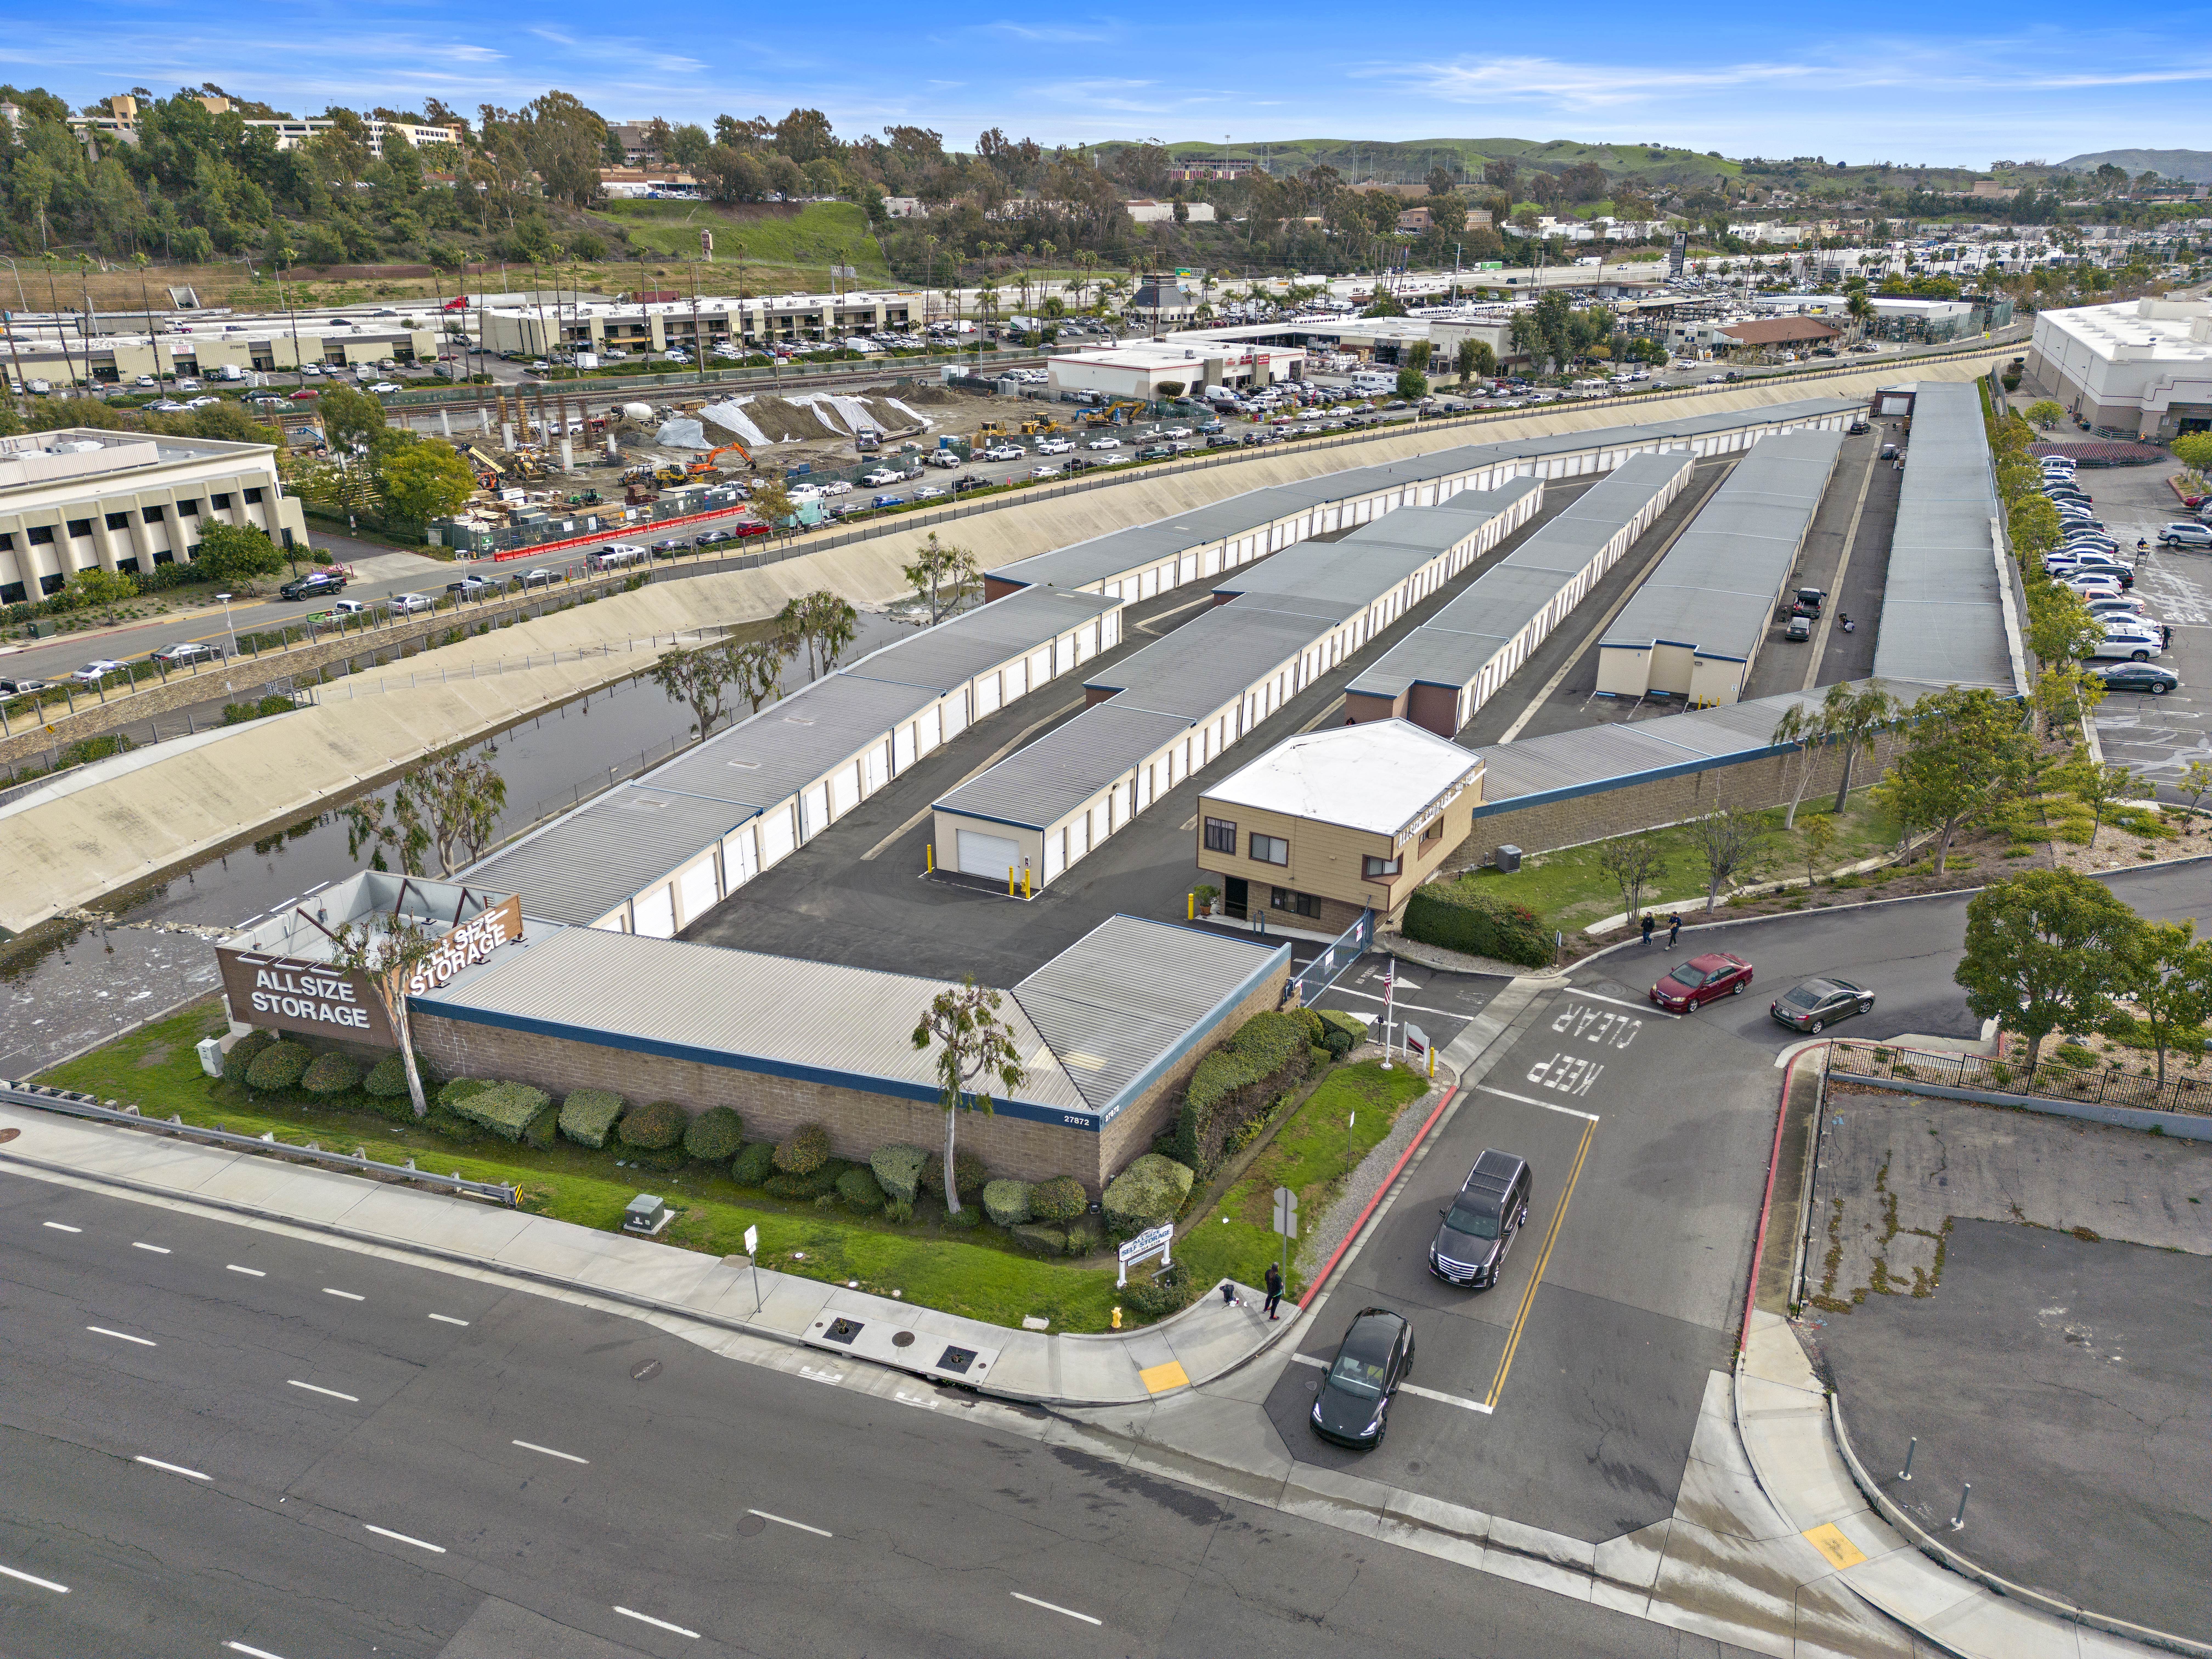 An aerial view of the Allsize Self Storage facility and fenced campus.